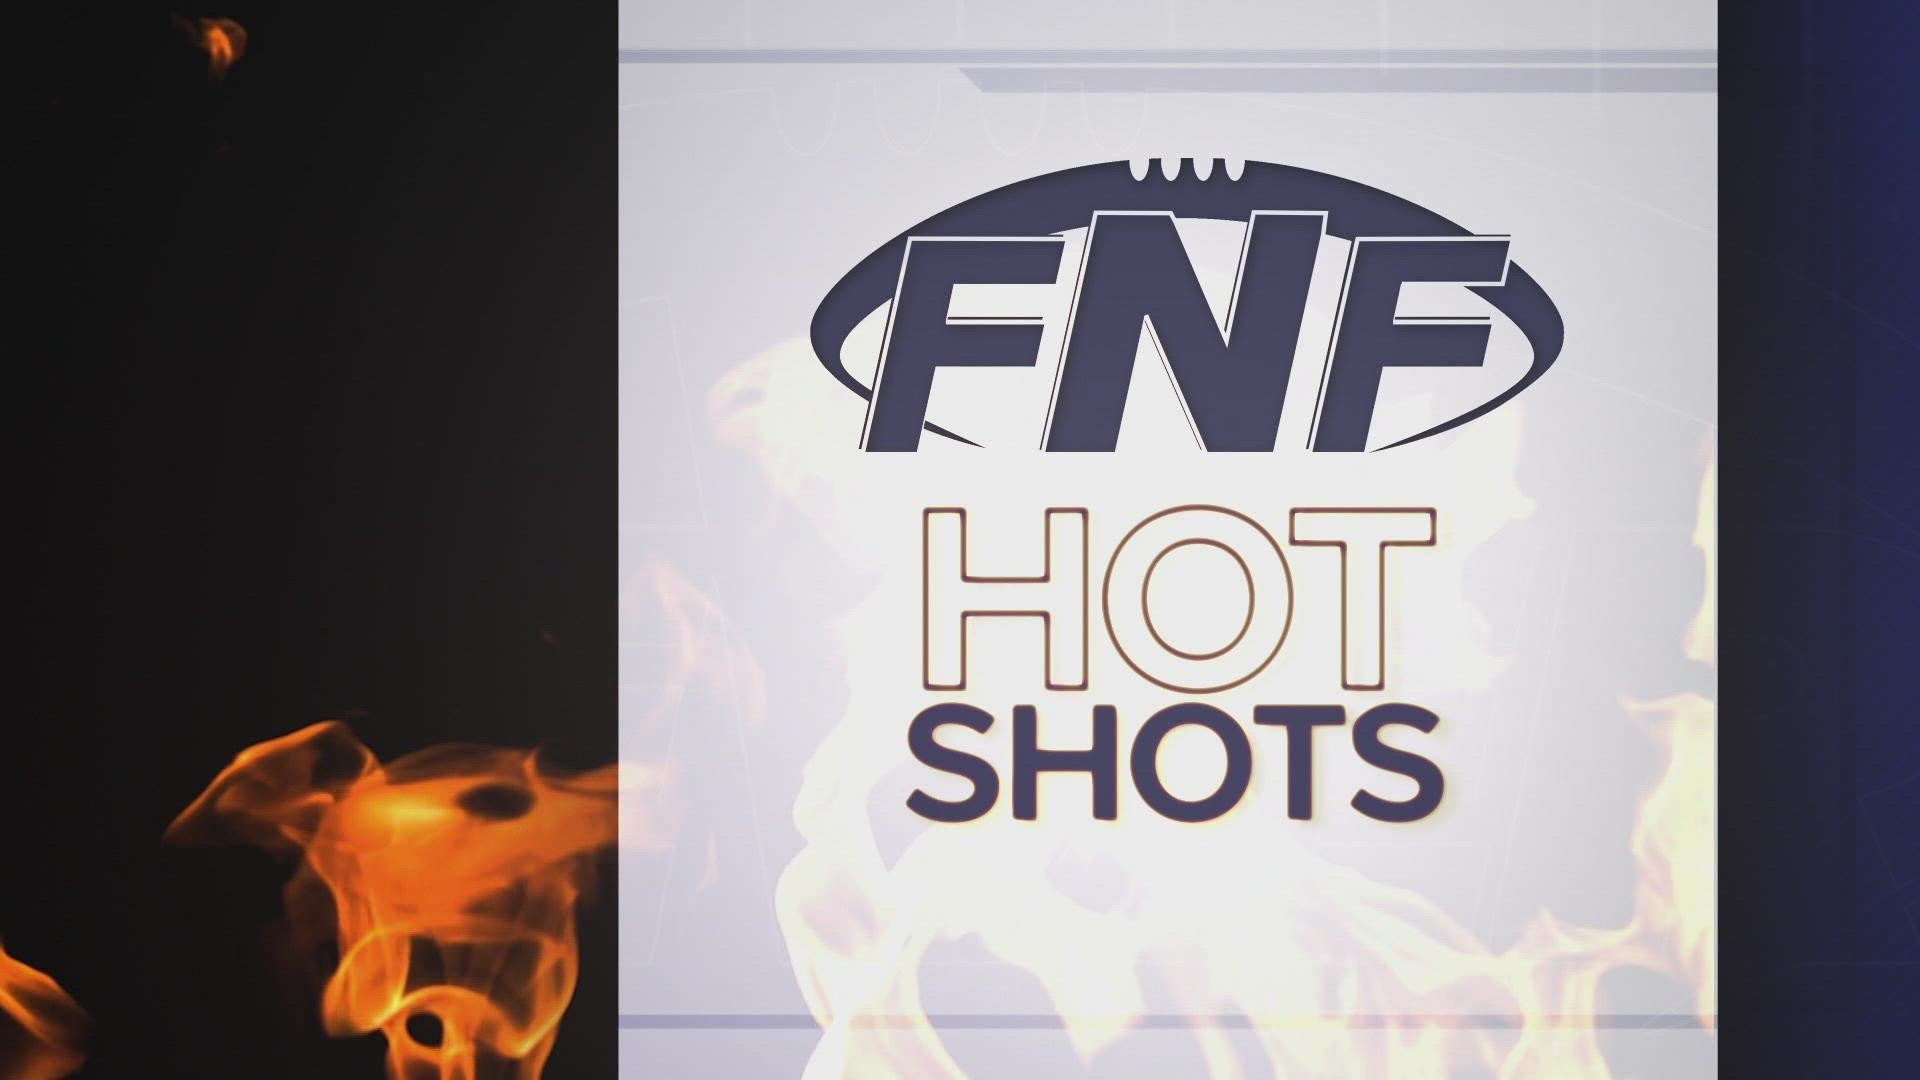 3 more awesome plays have been nominated to be the FNF Hot Shots Play of the Week! Watch the plays here and vote for your favorite at 12News.com/Fever!